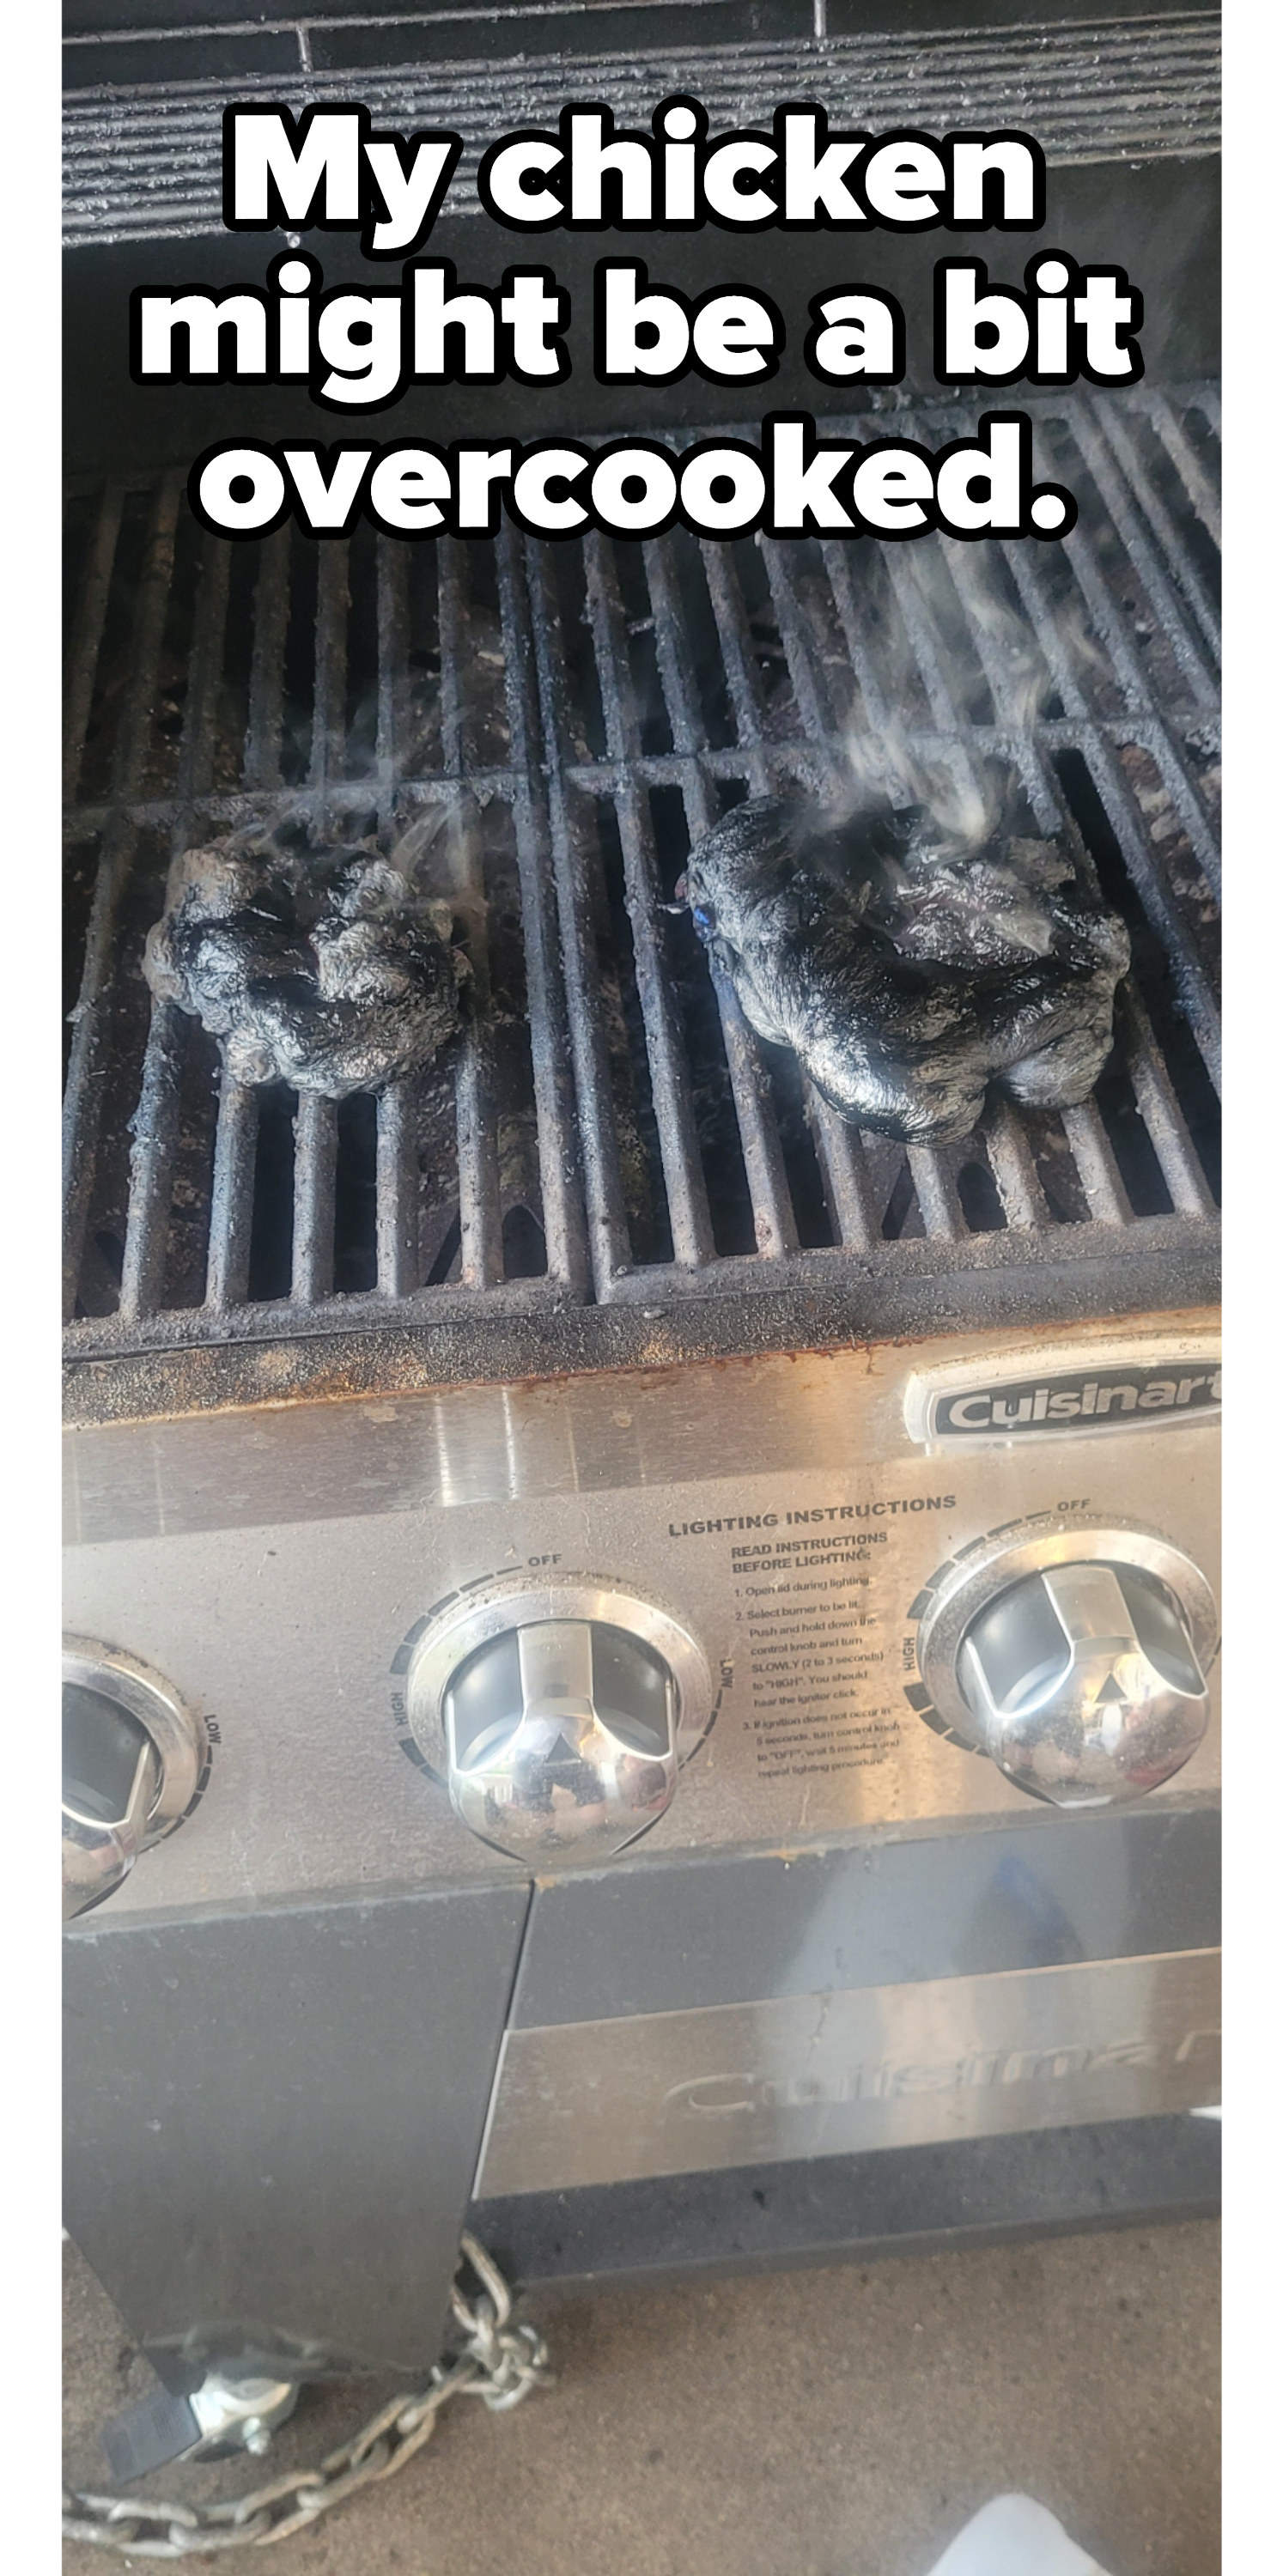 Burnt chicken on the grill